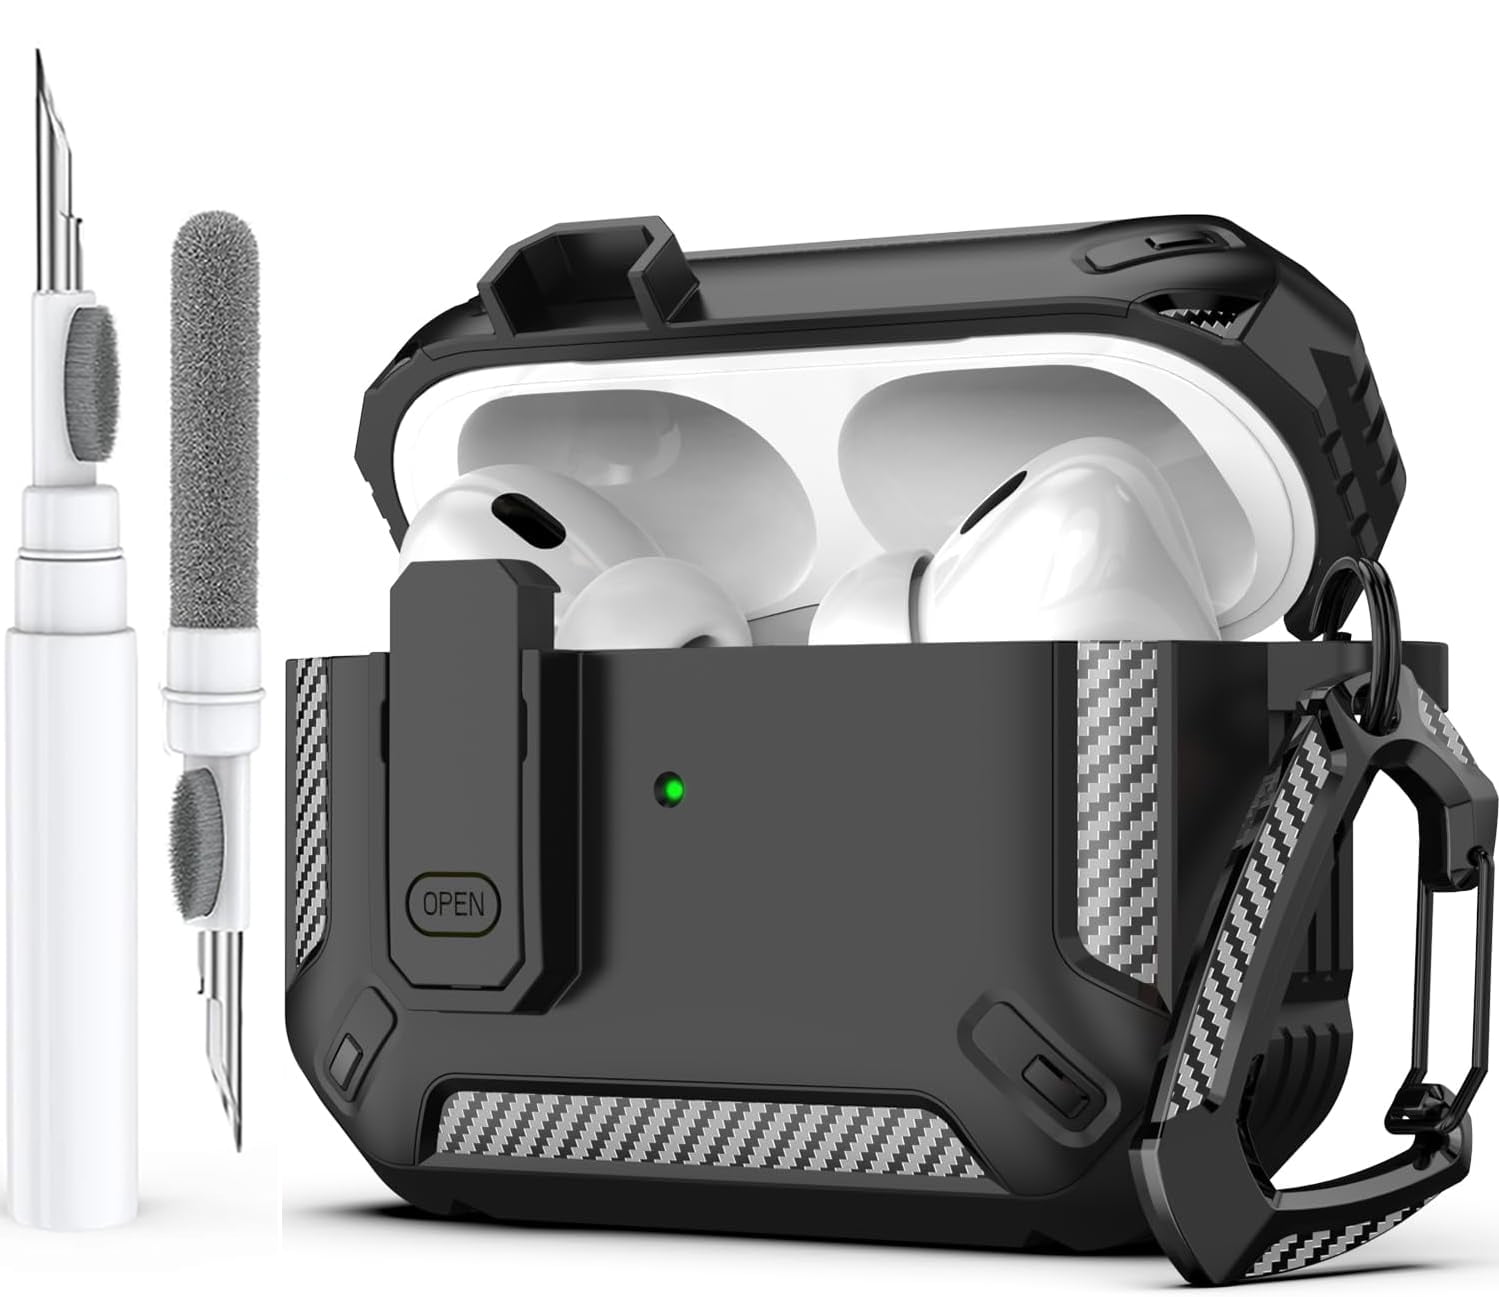 AirPod's Pro 2 2022 Case Mechanical Structure Cover for AirPods Pro Gen 2